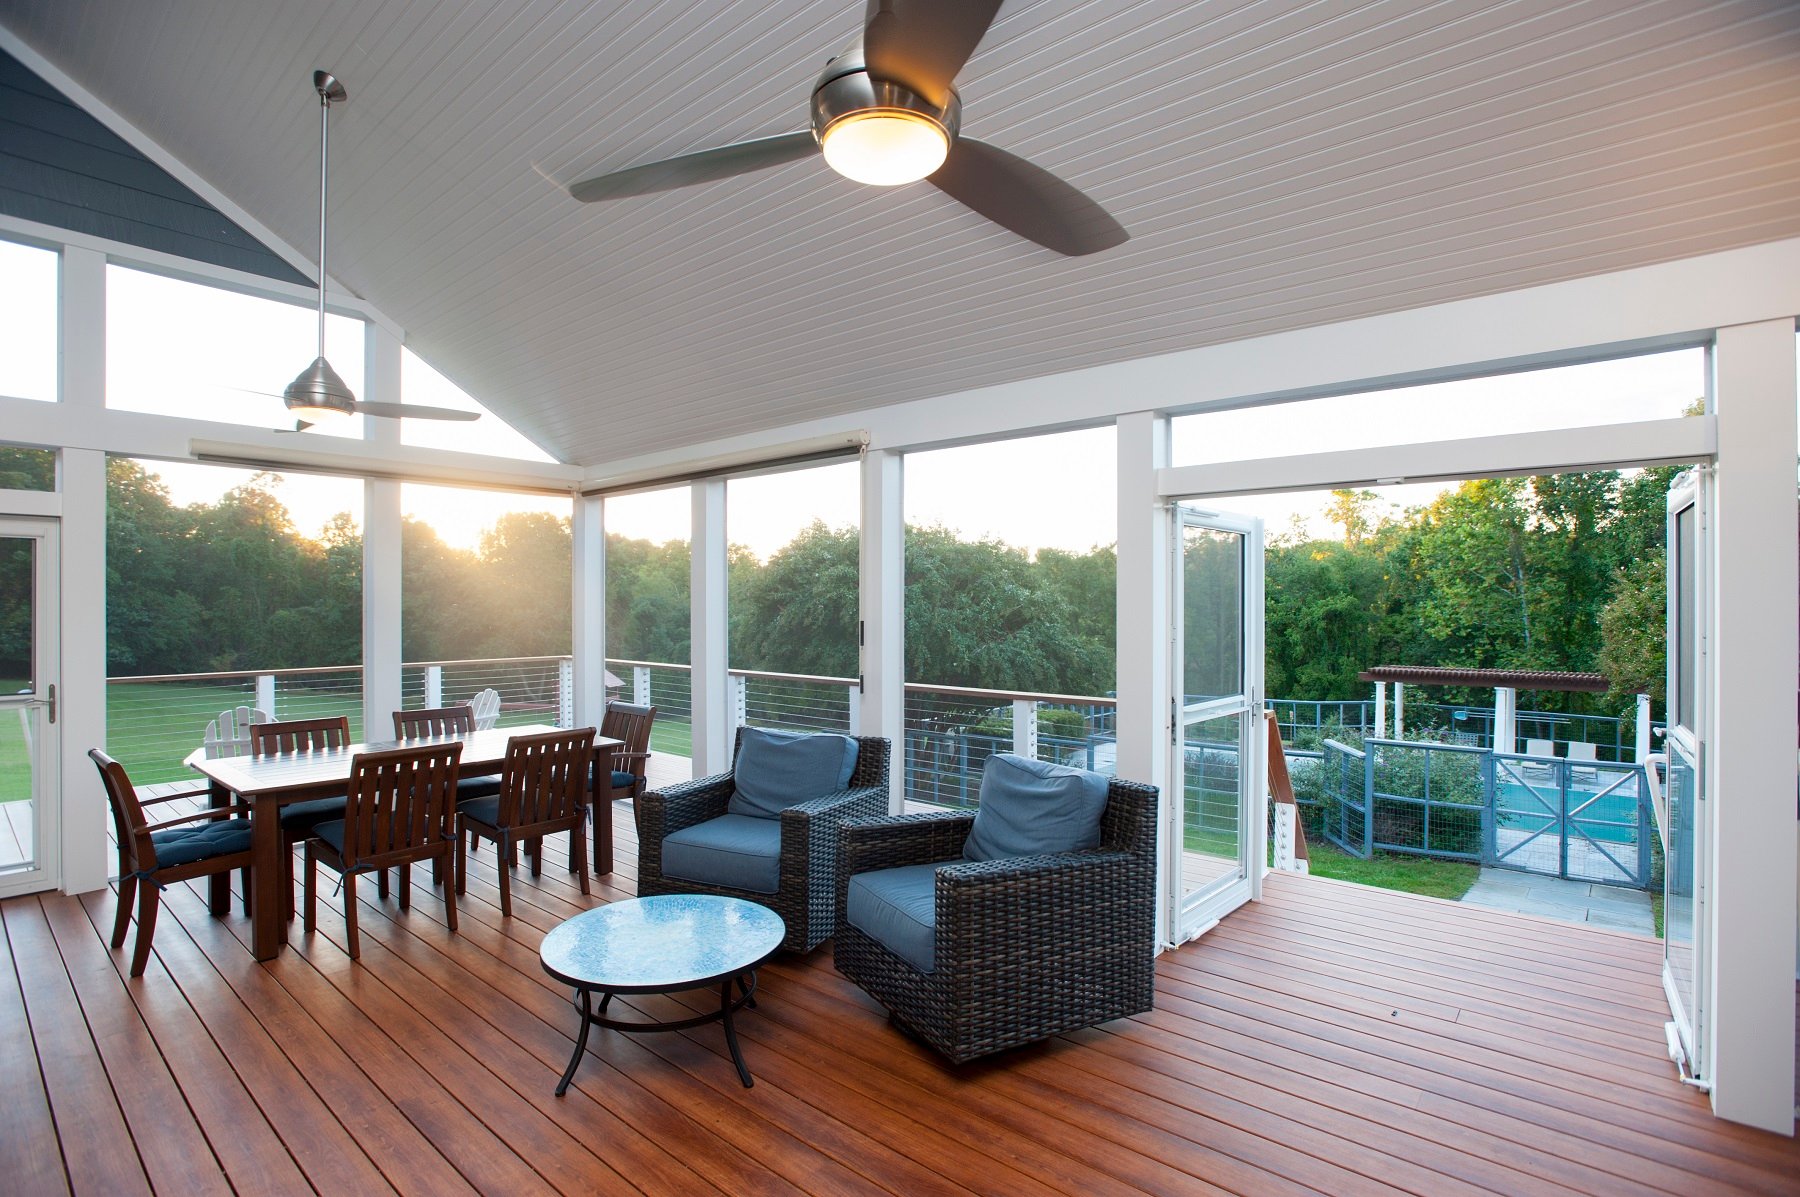 zuri decking screened porch at early sunset interior